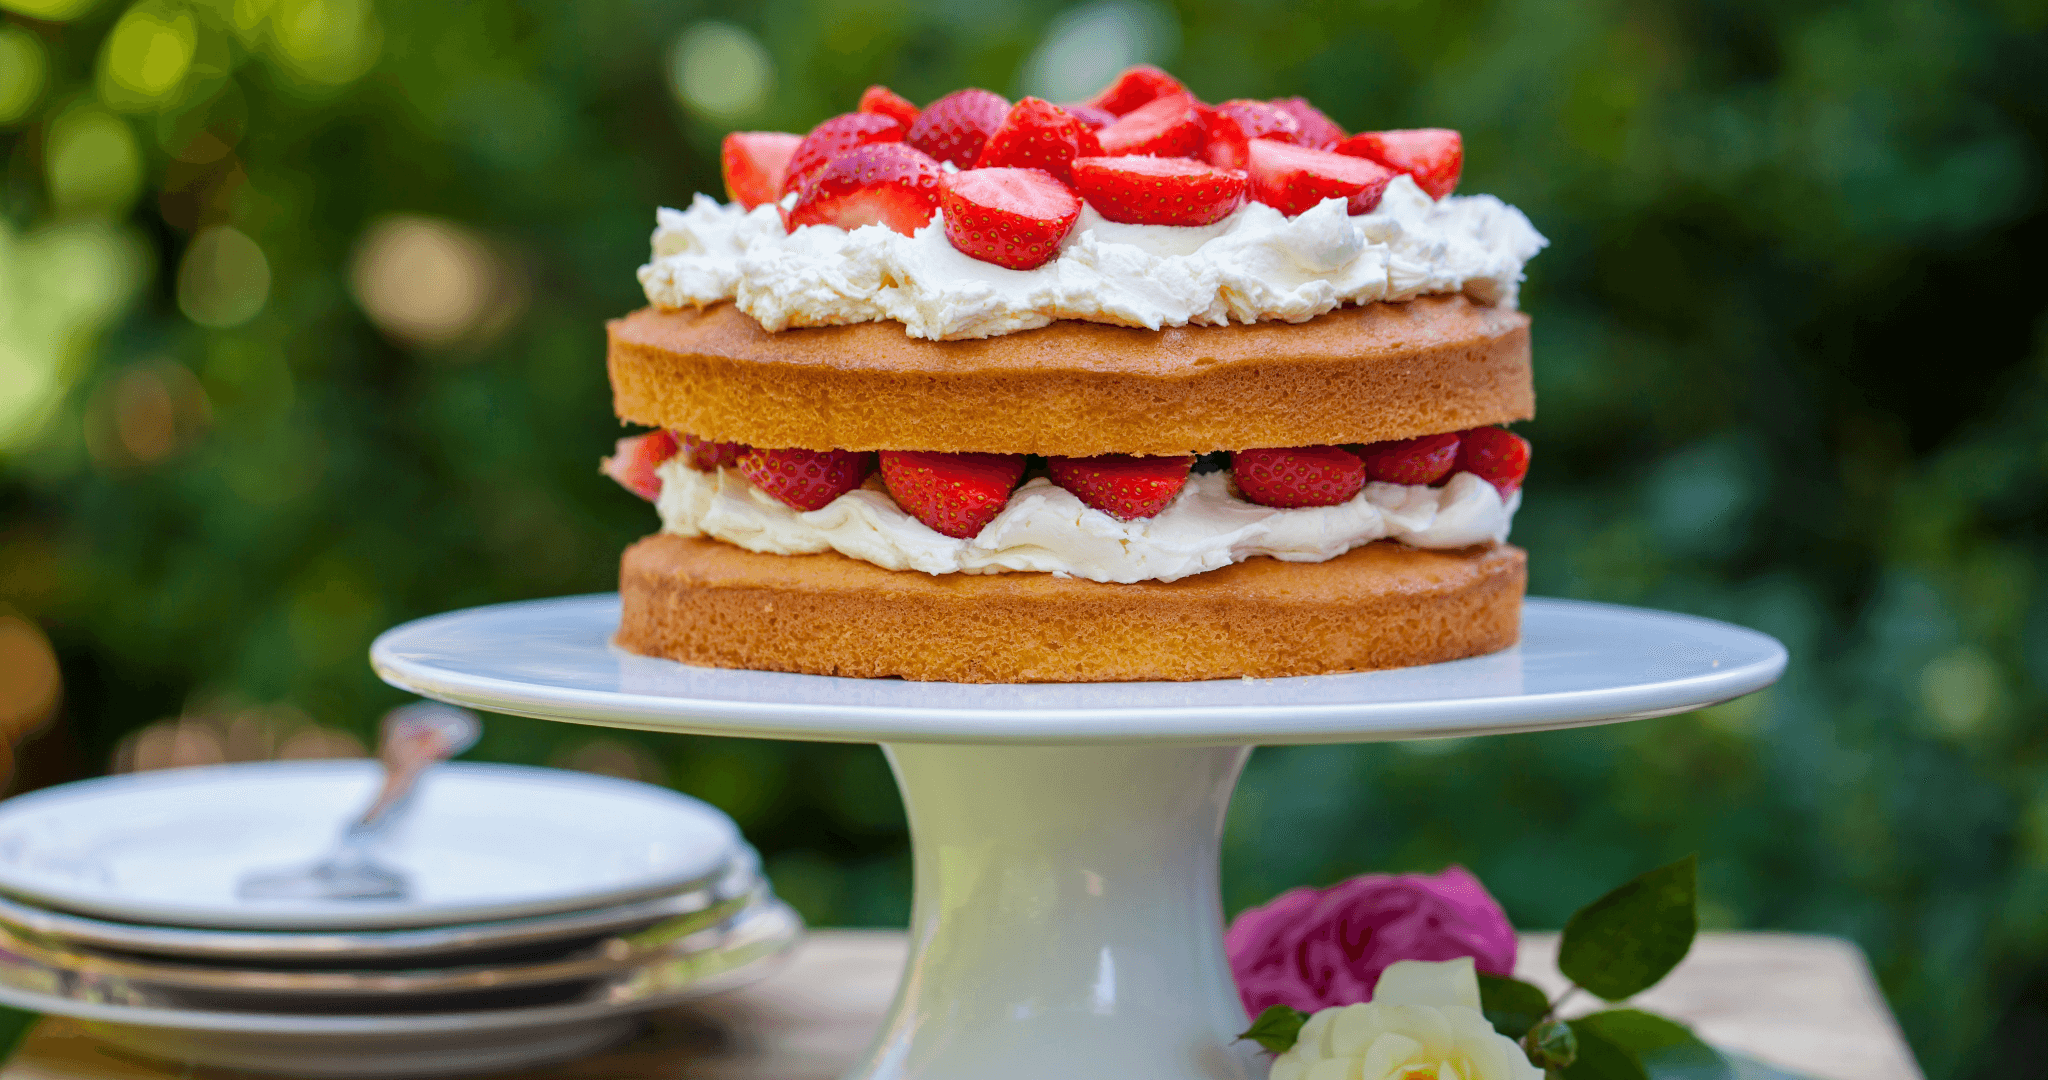 Strawberry and cream filled and topped Victoria sponge in the garden